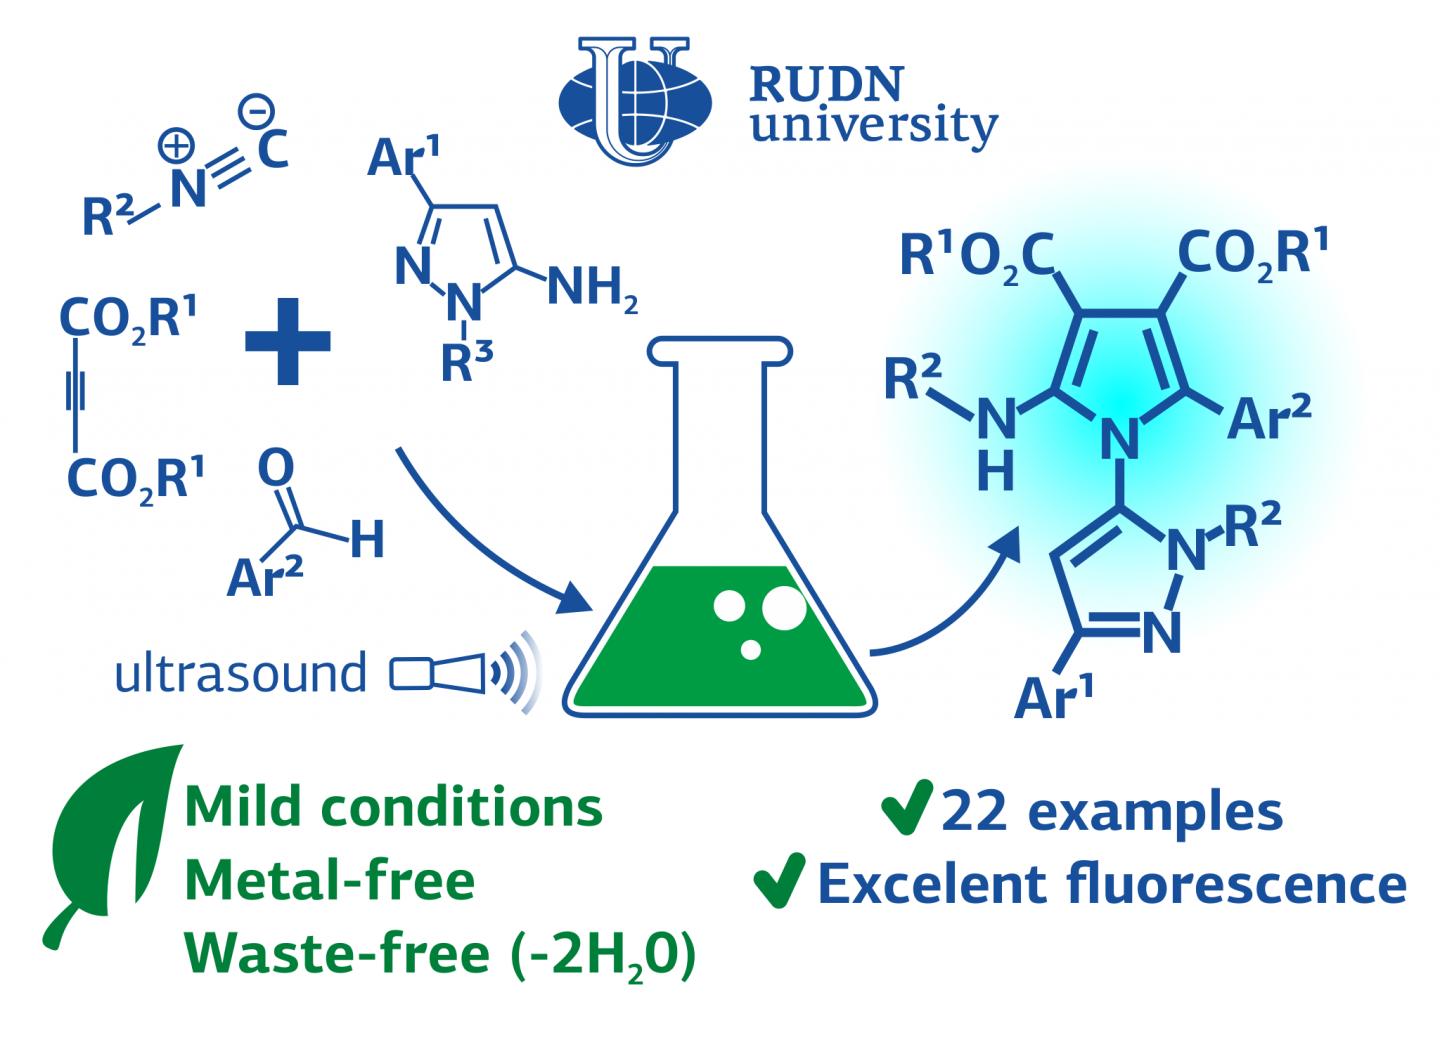 RUDN University Chemist Proposed Eco-Friendly Synthesis of Fluorescent Compounds for Medicine